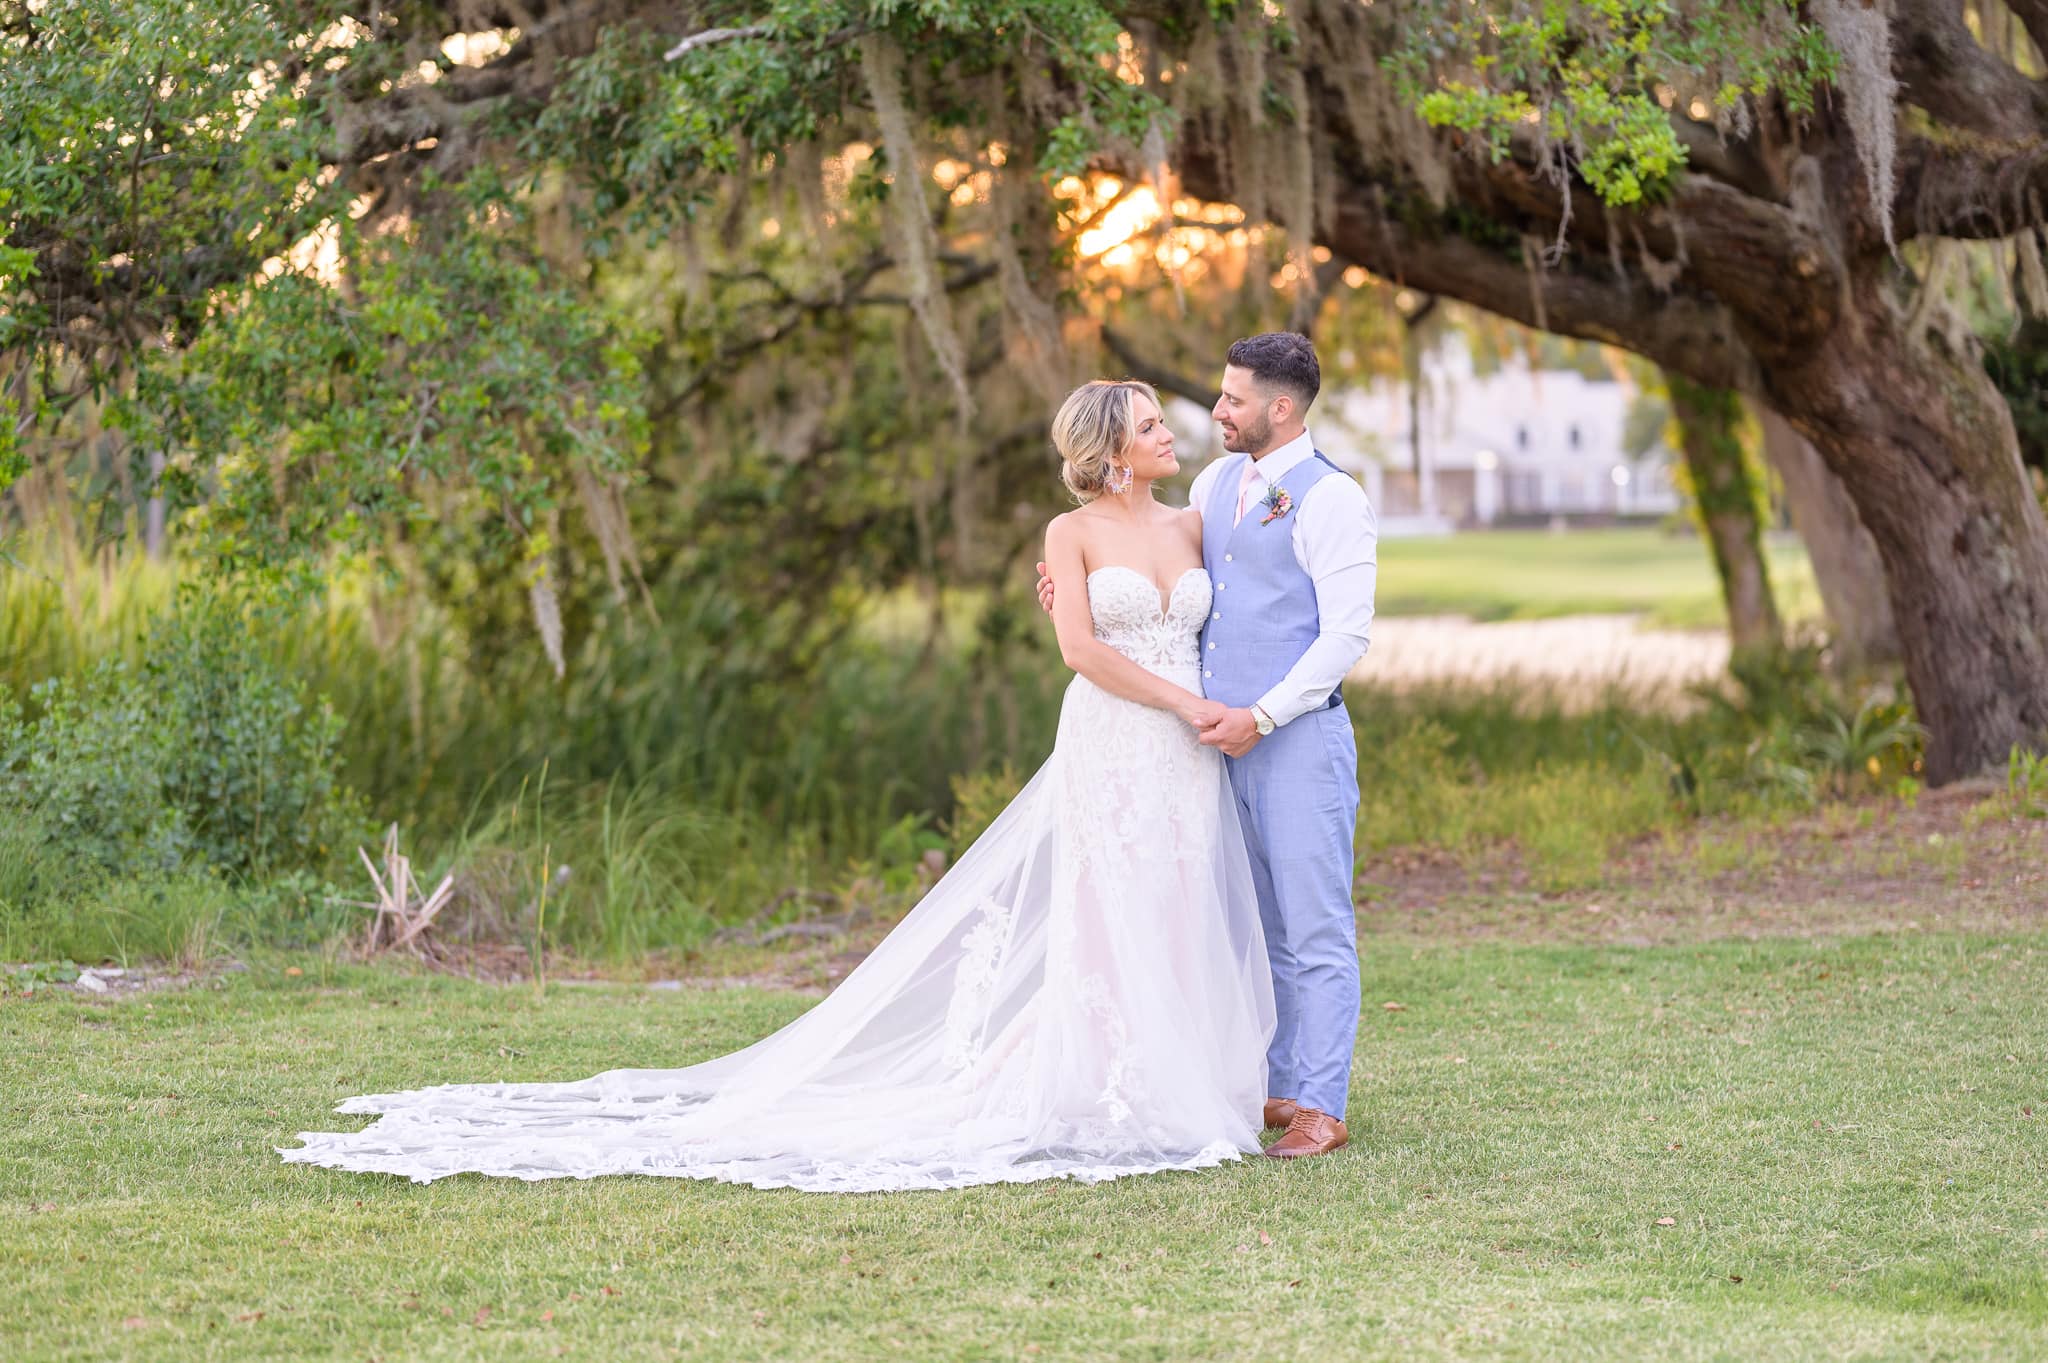 Holding hands in the sunset - Pawleys Plantation Golf & Country Club